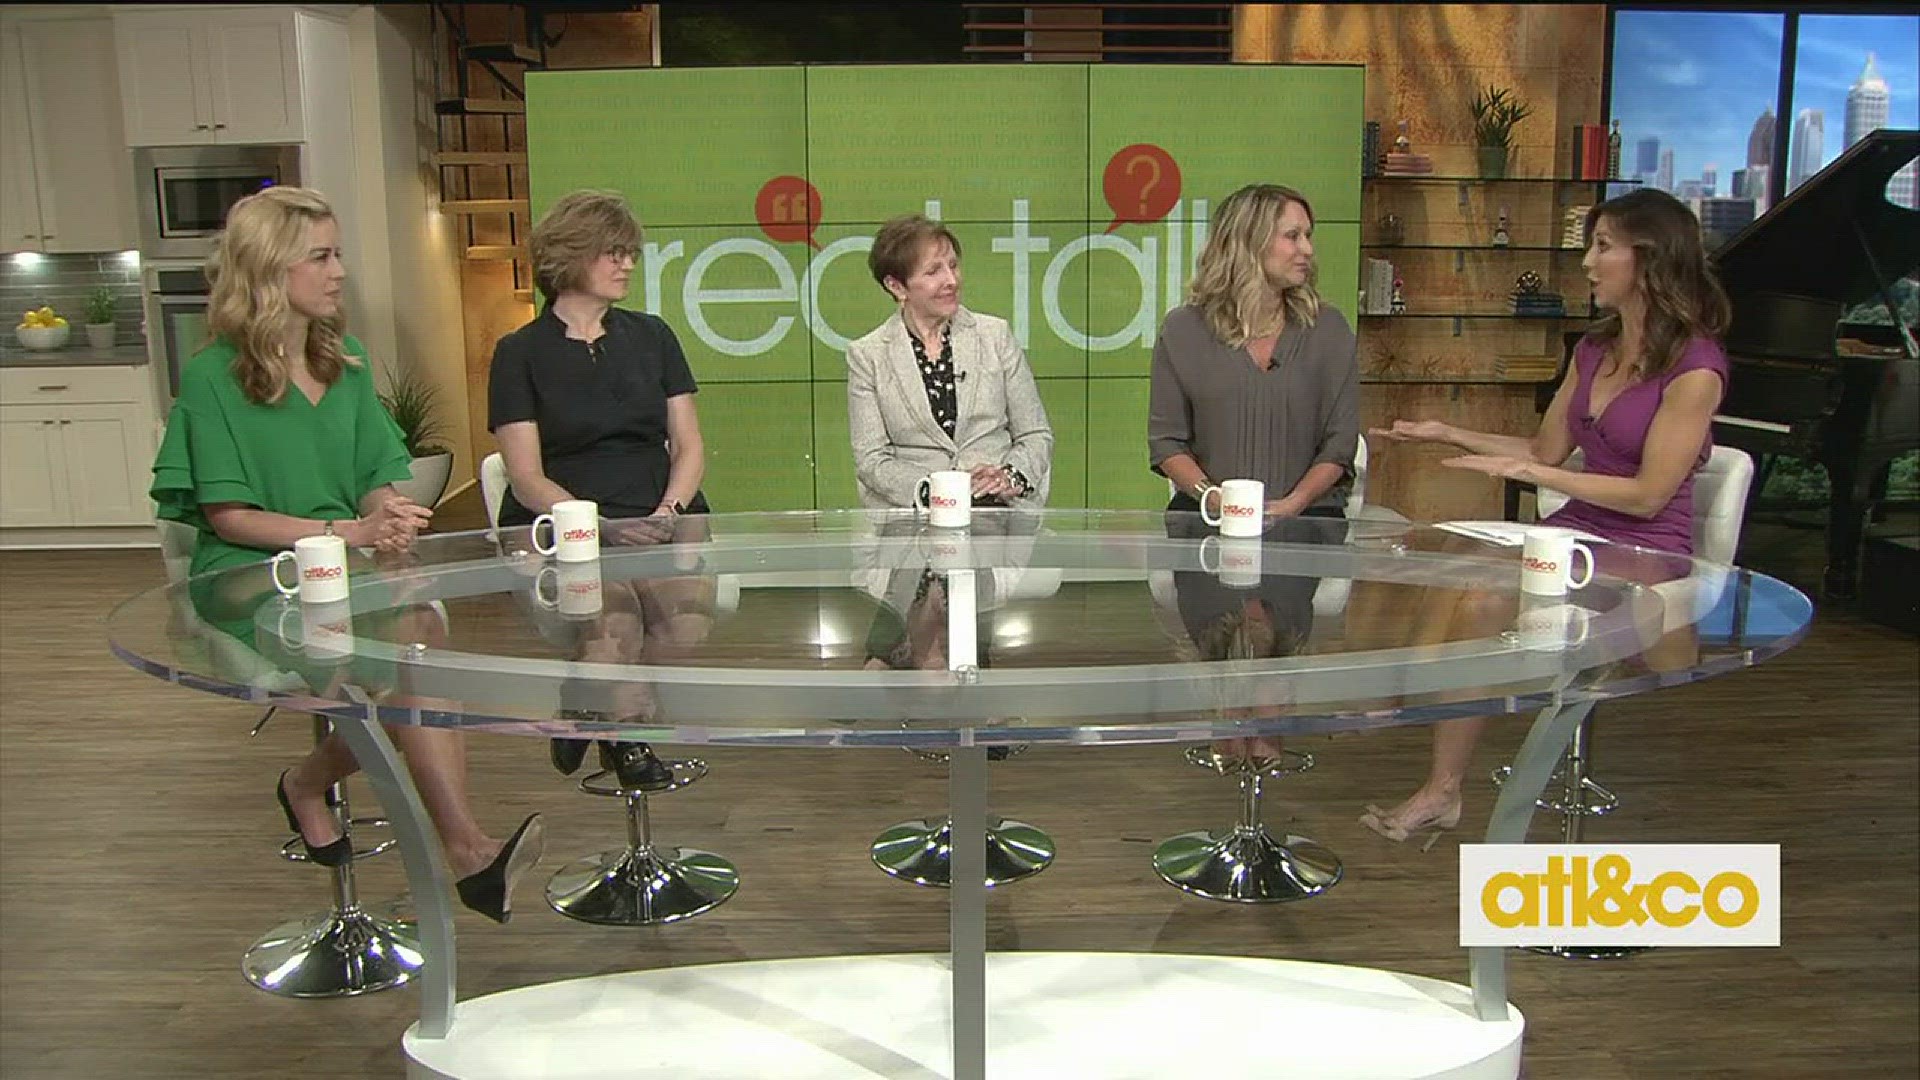 Real Talk: It's a growing trend of "mommy drinking culture"... is it normalizing alcoholism? Moms and medical experts weigh in on the stigma of women and drinking on 11Alive's 'Atlanta & Company'.